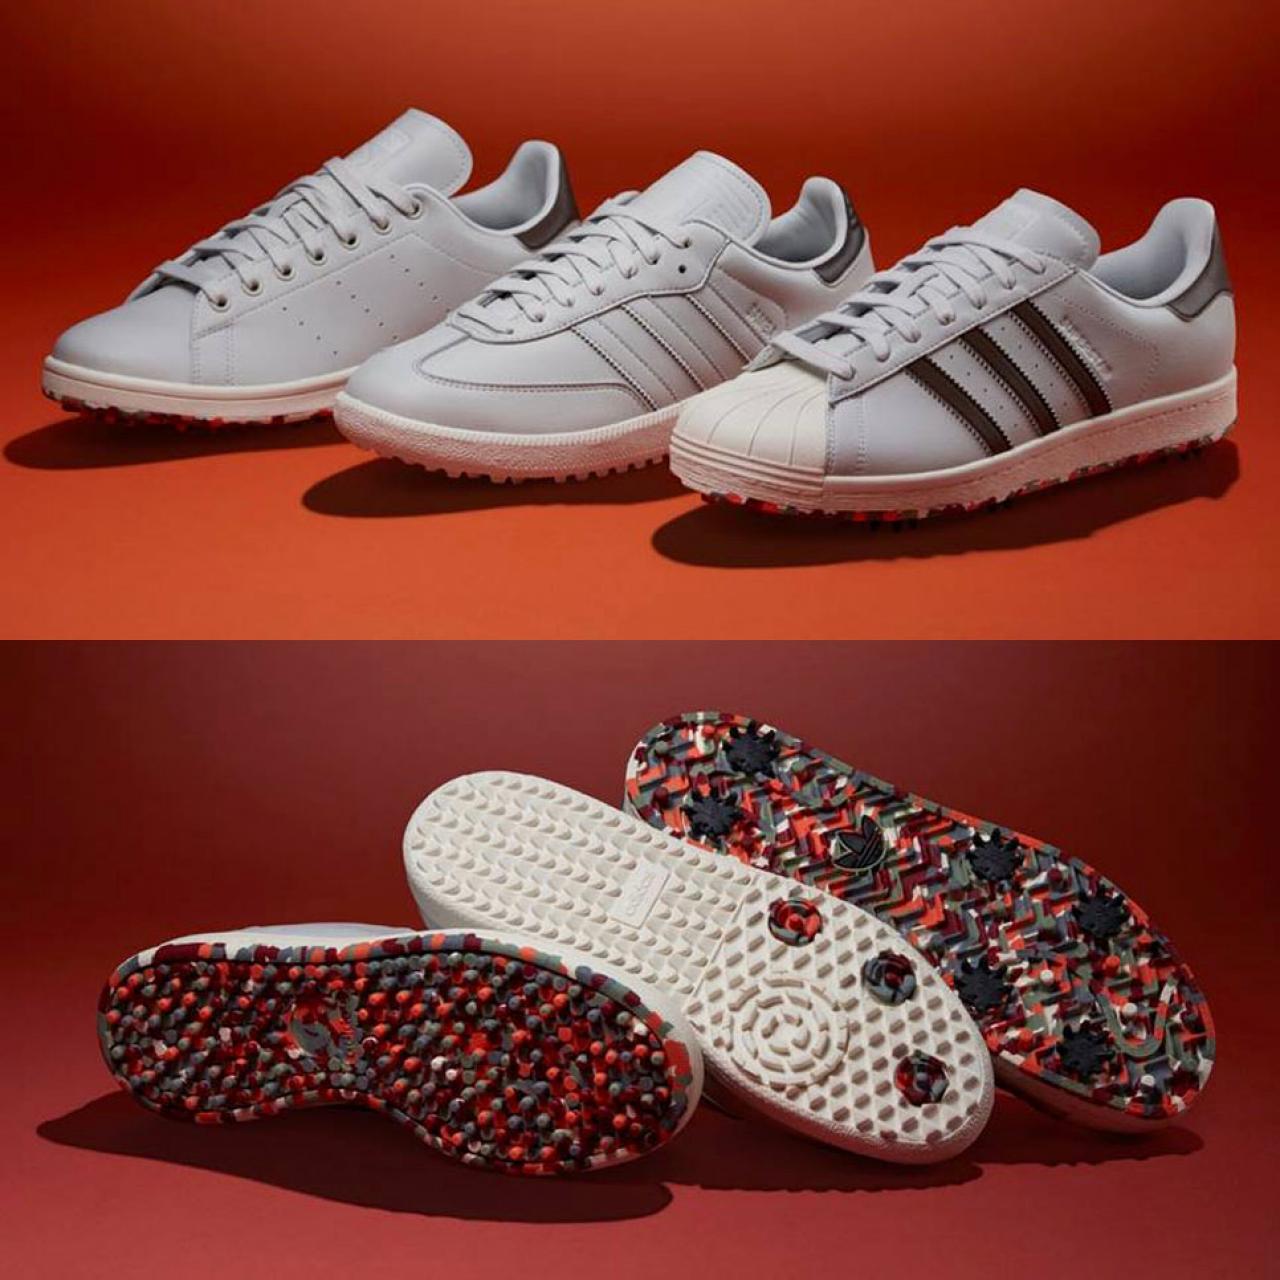 Adidas is making Stan Smiths and Superstars harder to find